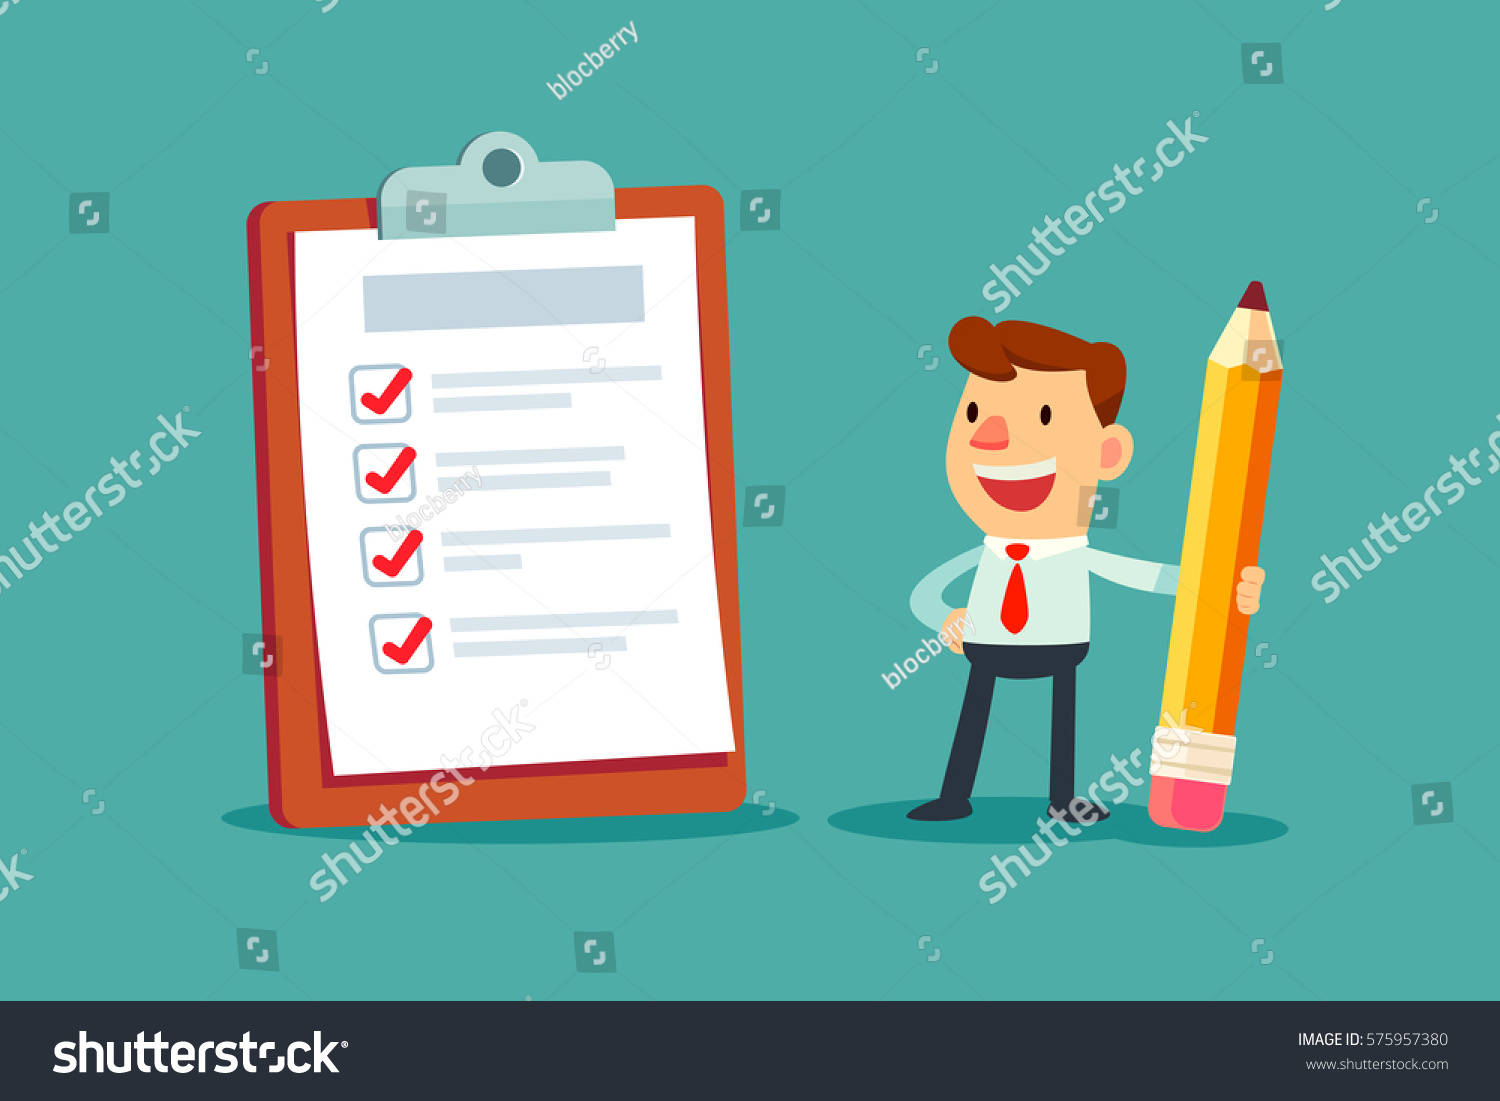 SVG of Happy businessman holding a pencil looking at completed checklist on clipboard. svg